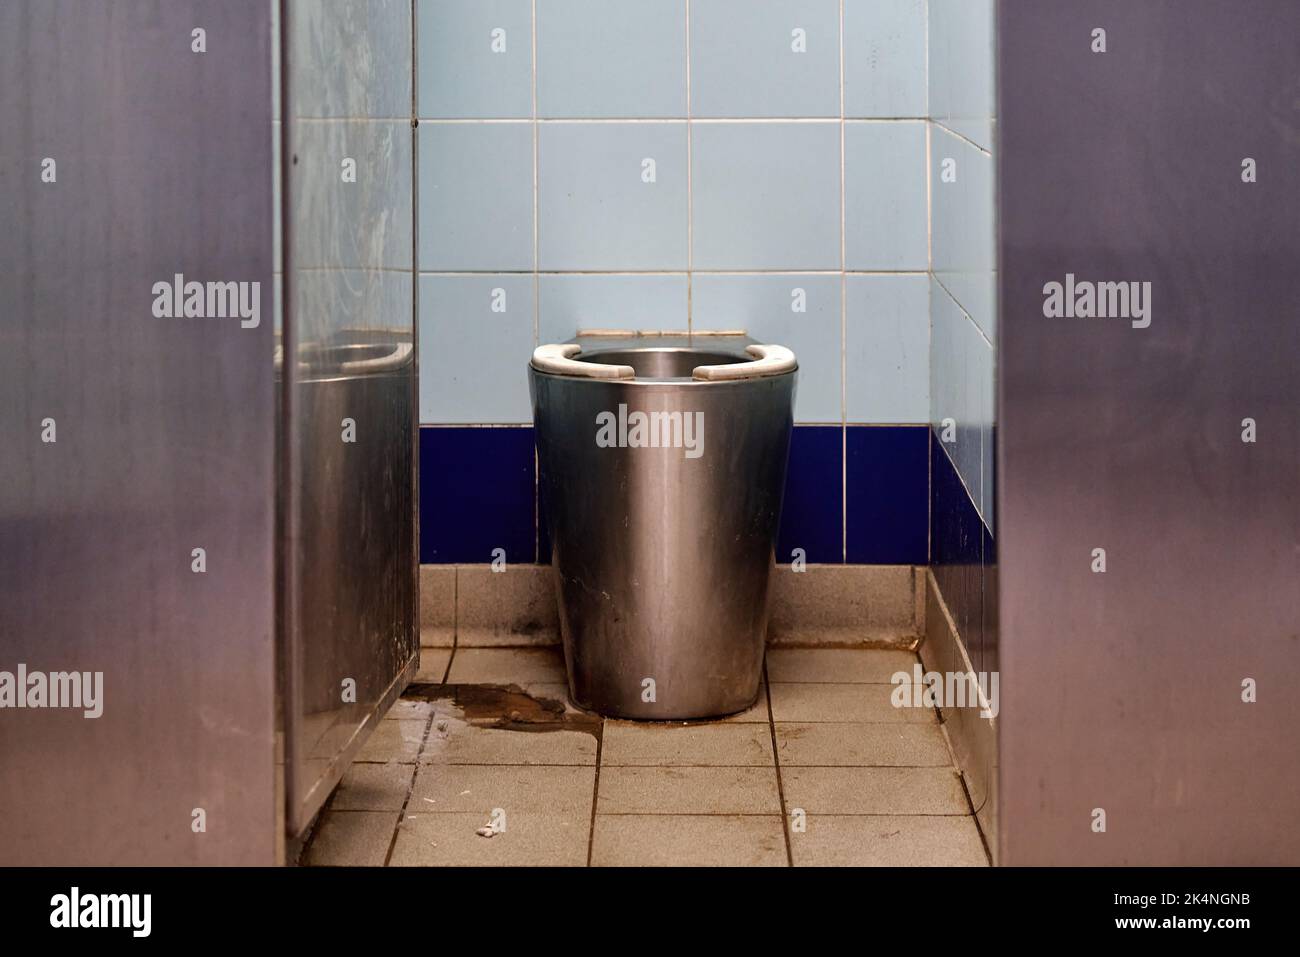 A stainless steel public toilet Stock Photo